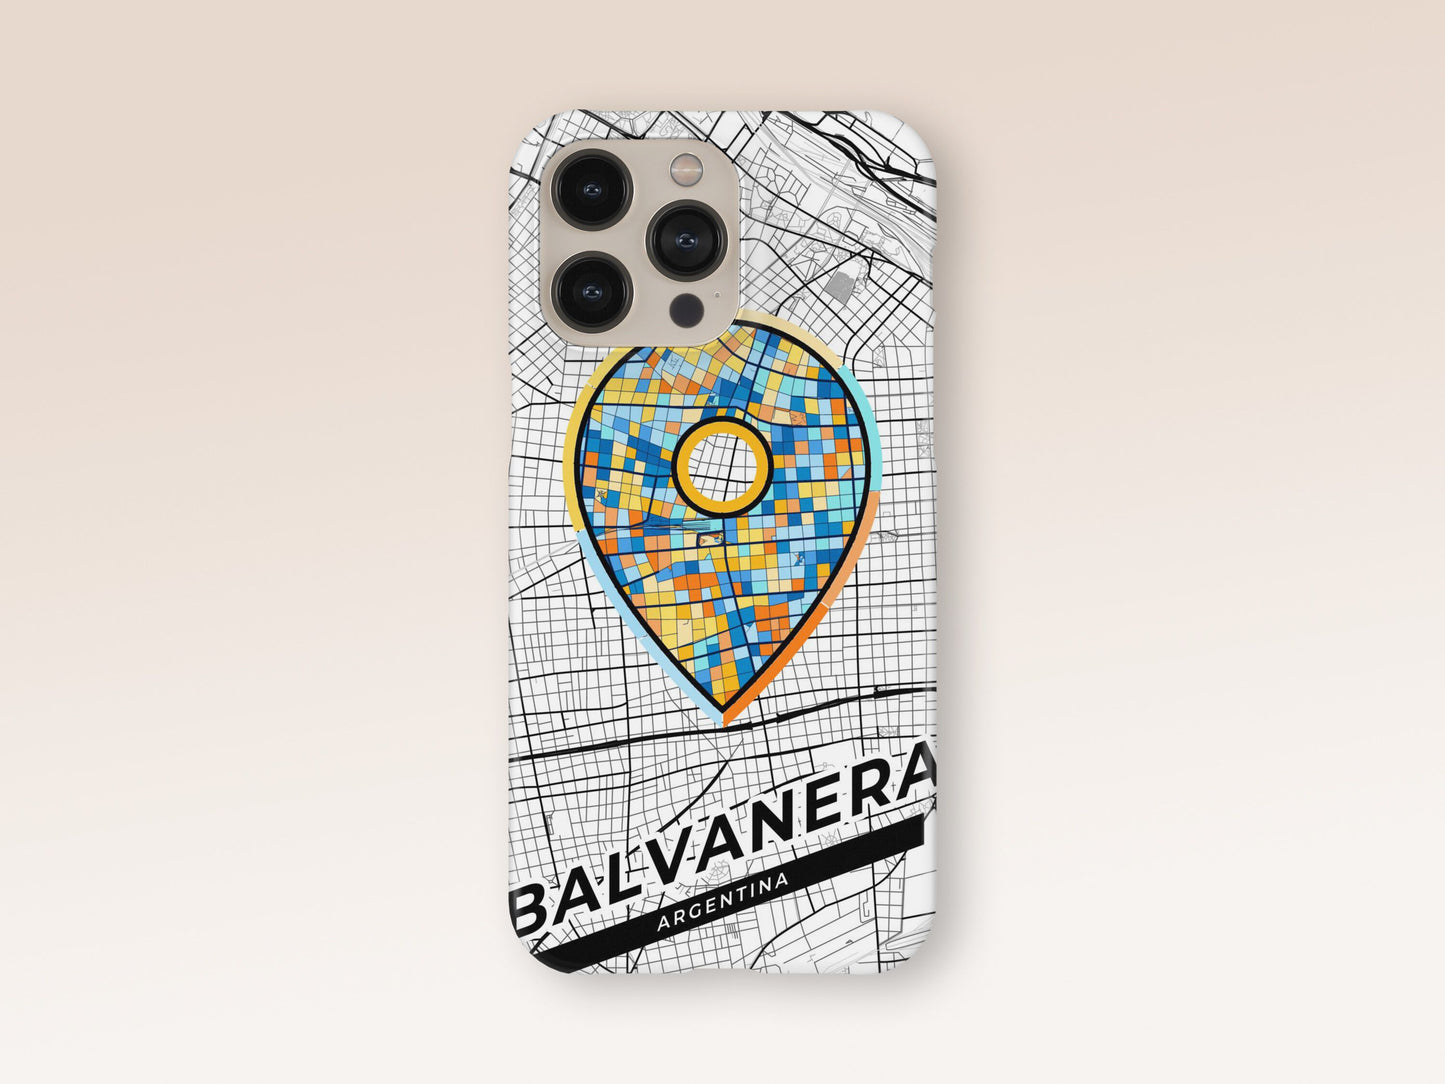 Balvanera Argentina slim phone case with colorful icon. Birthday, wedding or housewarming gift. Couple match cases. 1